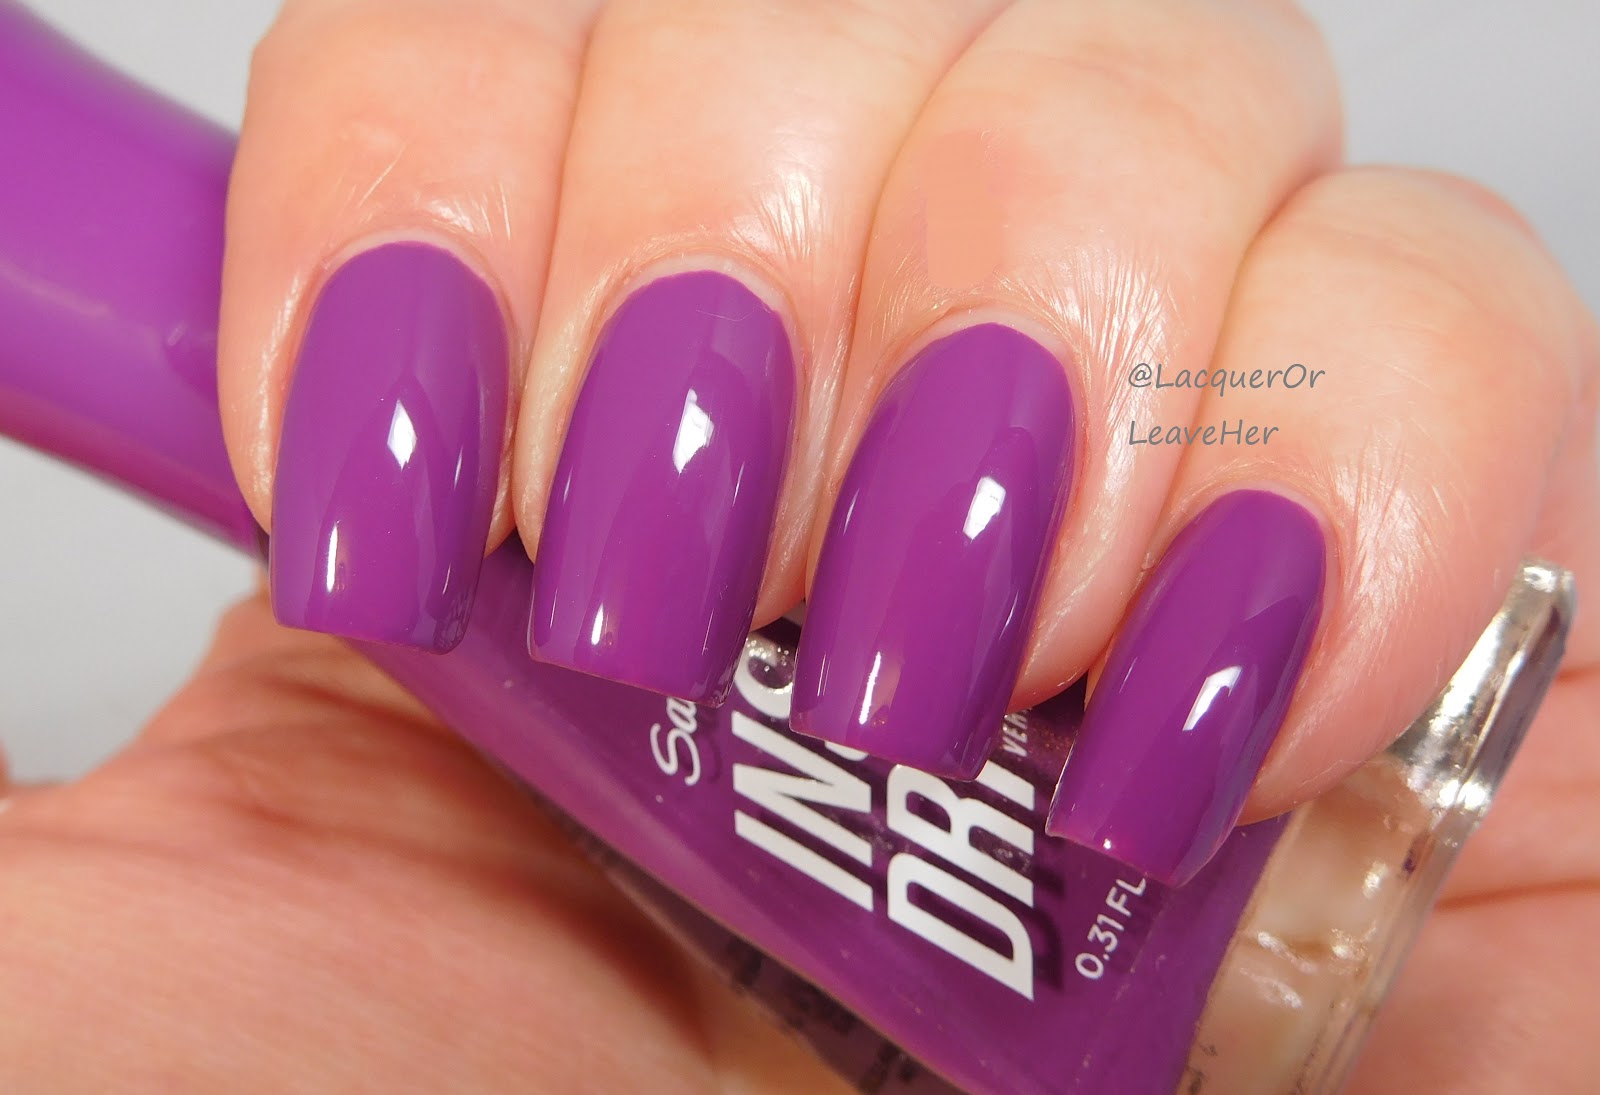 Lacquer or Leave Her!: New Sally Hansen Insta-Dris, part 2!